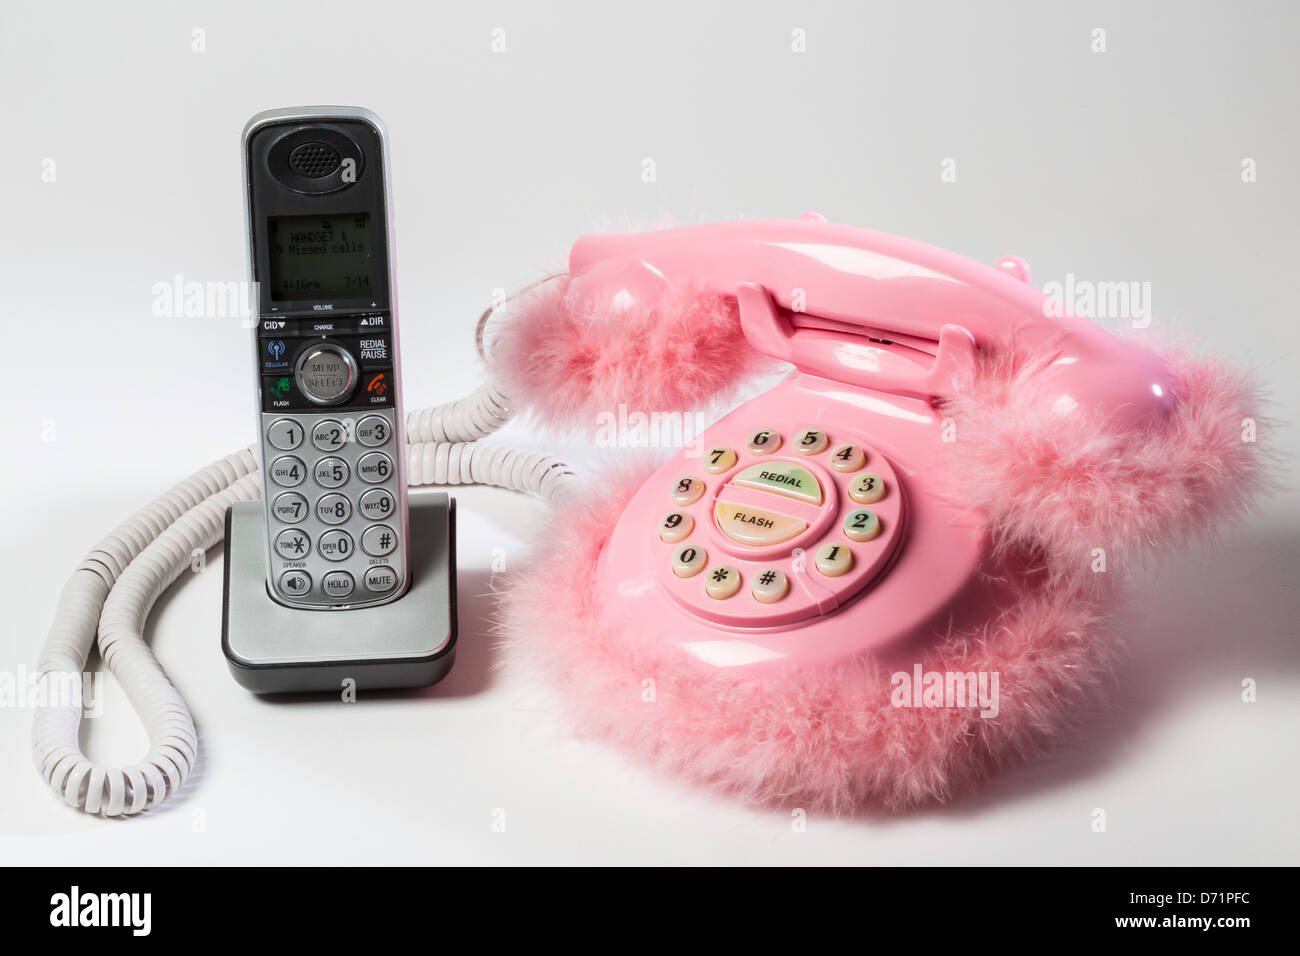 Still Life Pink Fluffy Retro Style Phone and Modern Cordless Phone Stock  Photo - Alamy